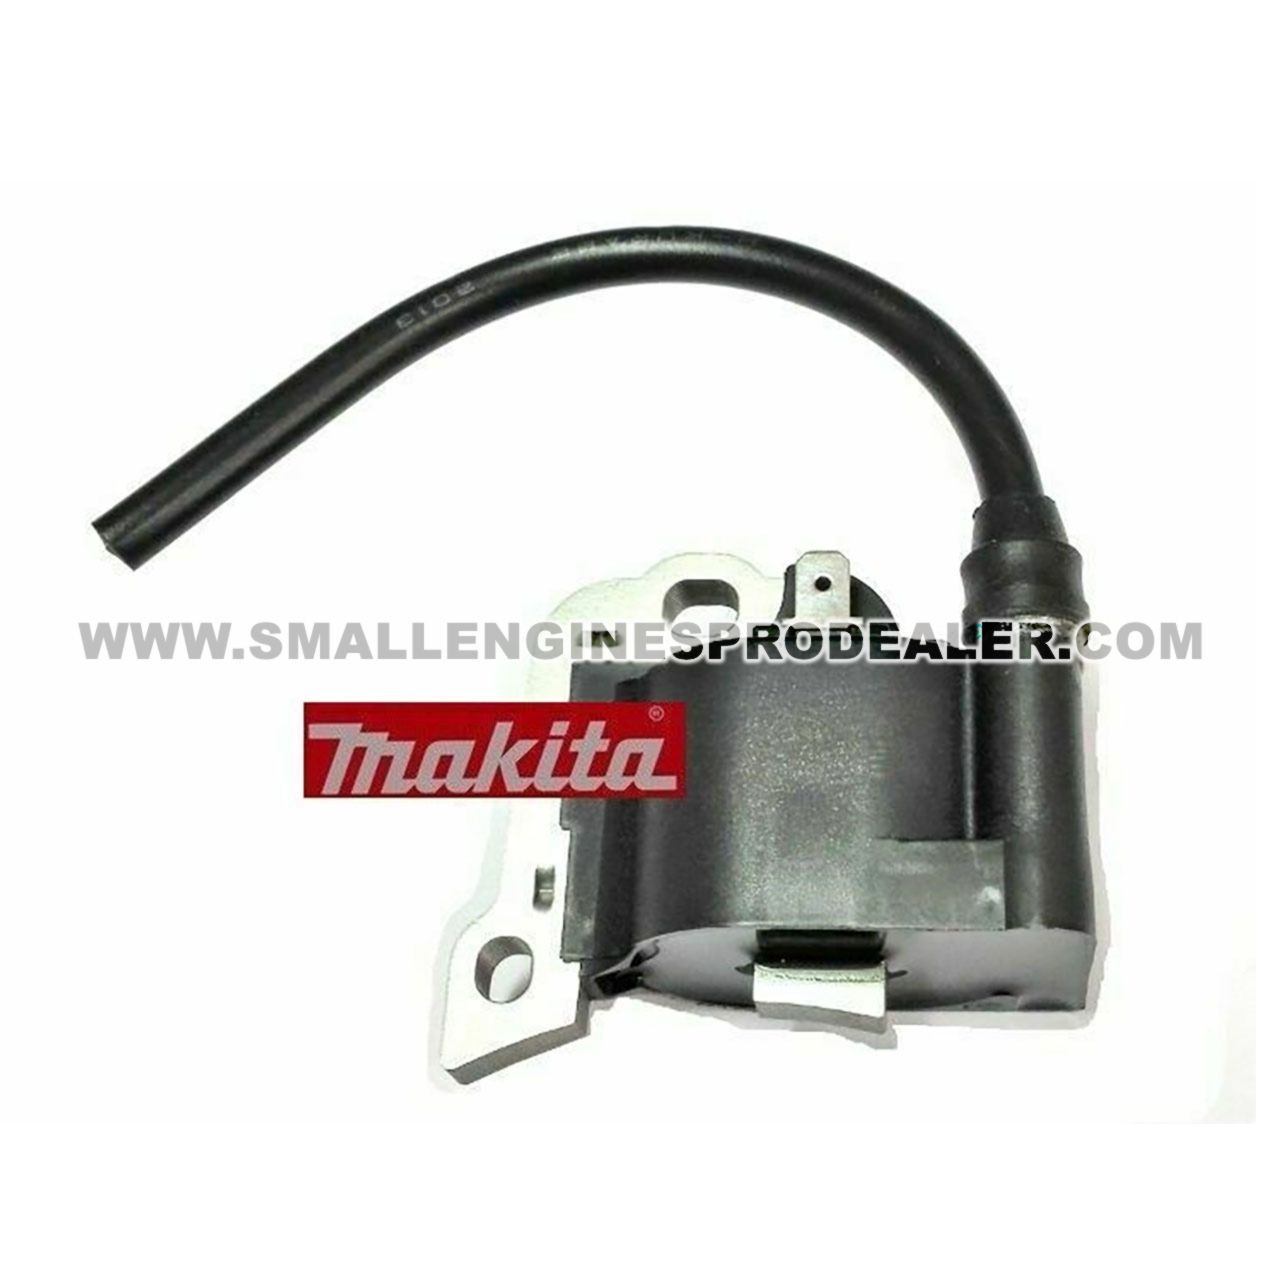 Details about   Makita Ignition Coil 168816-0 